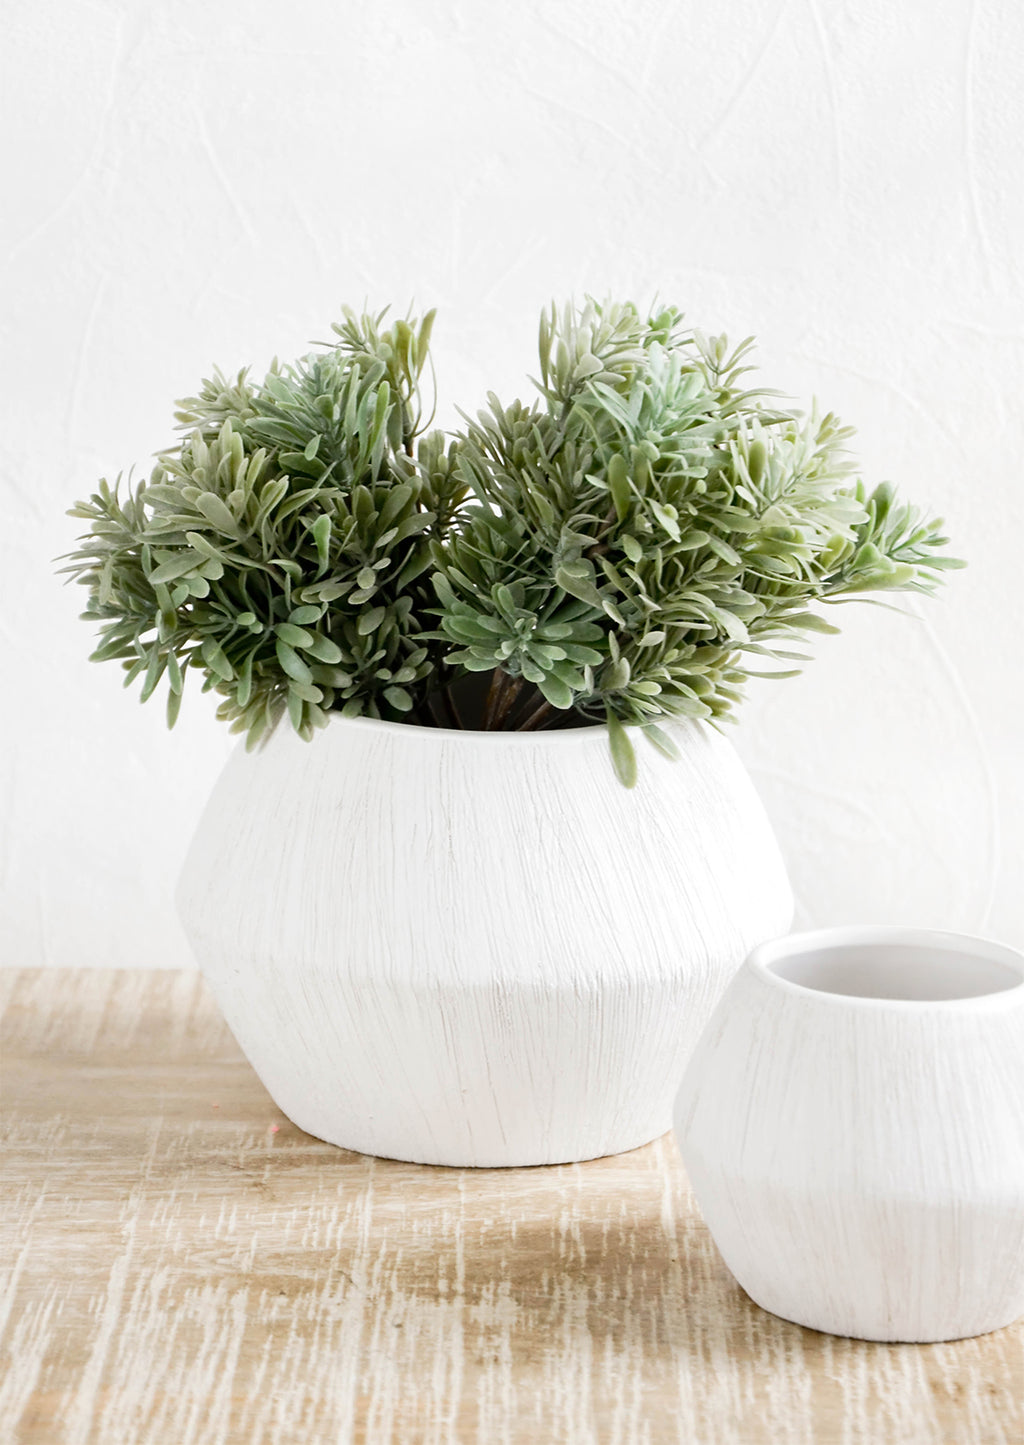 1: Reverse hourglass shaped planters in small and large size. White ceramic with allover fine line texture.